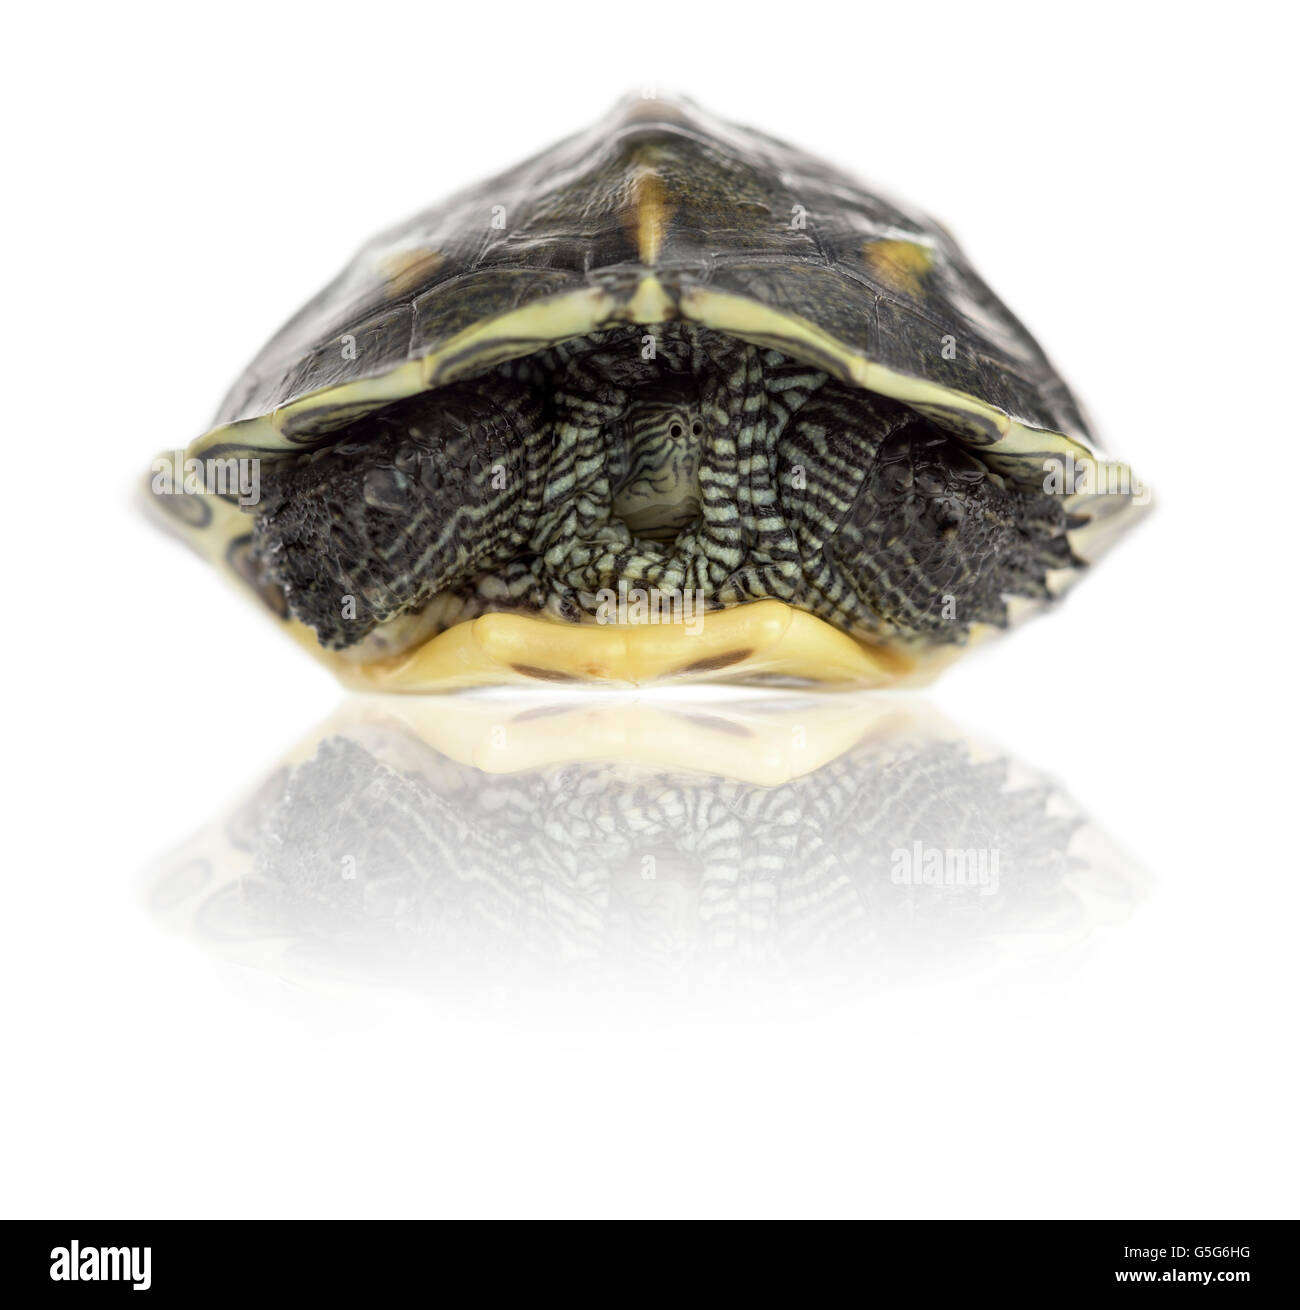 Chinese stripe-necked turtle (1 year old), Ocadia sinensis, hiding in its shell in front of a white background Stock Photo